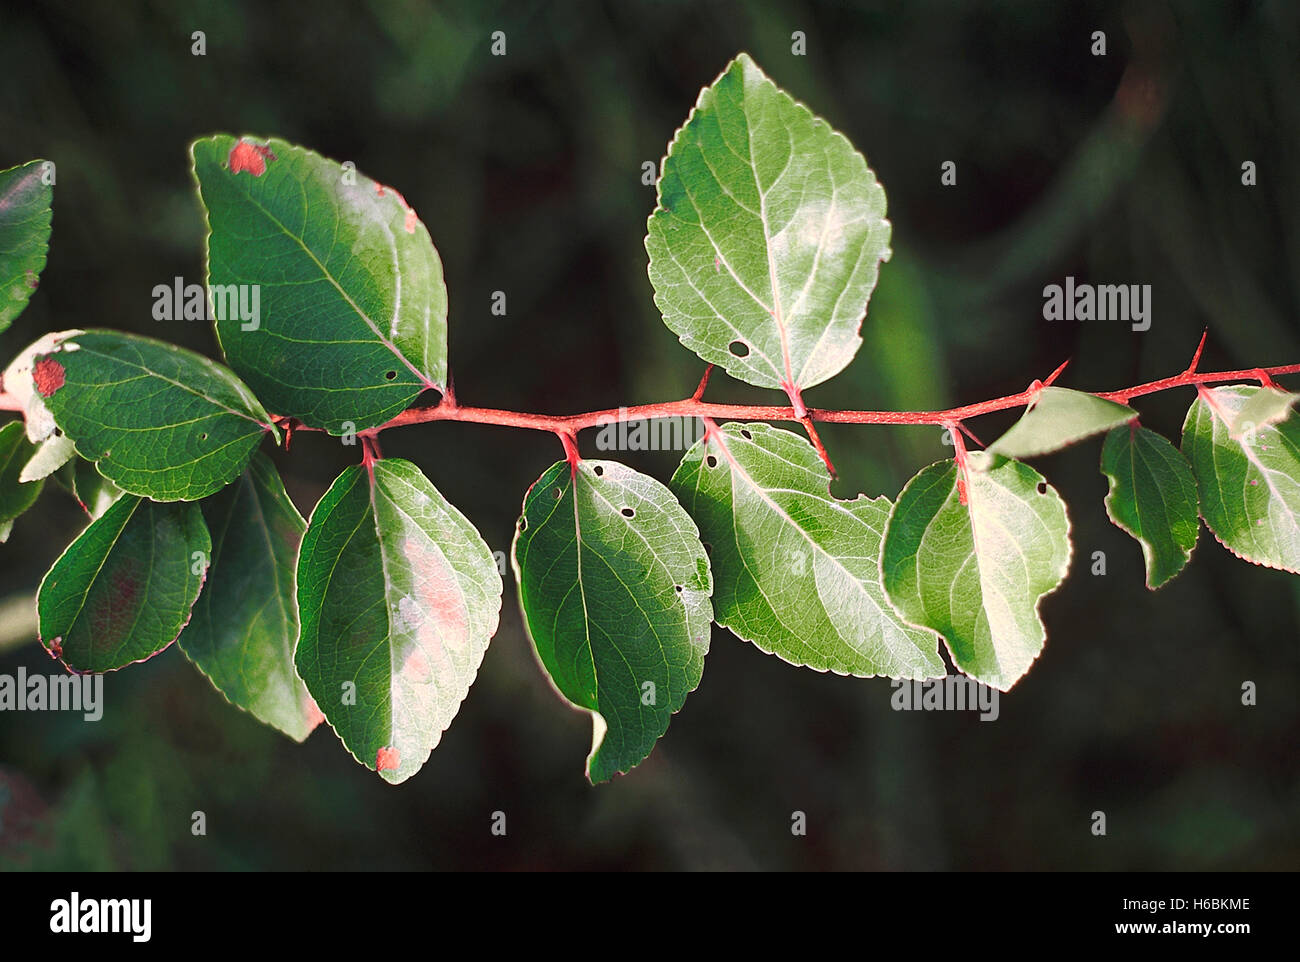 Leaves. Flacourtia Indica. Family: Flacourtiaceae. A small, thorny, deciduous tree. The fruit is edible. Stock Photo